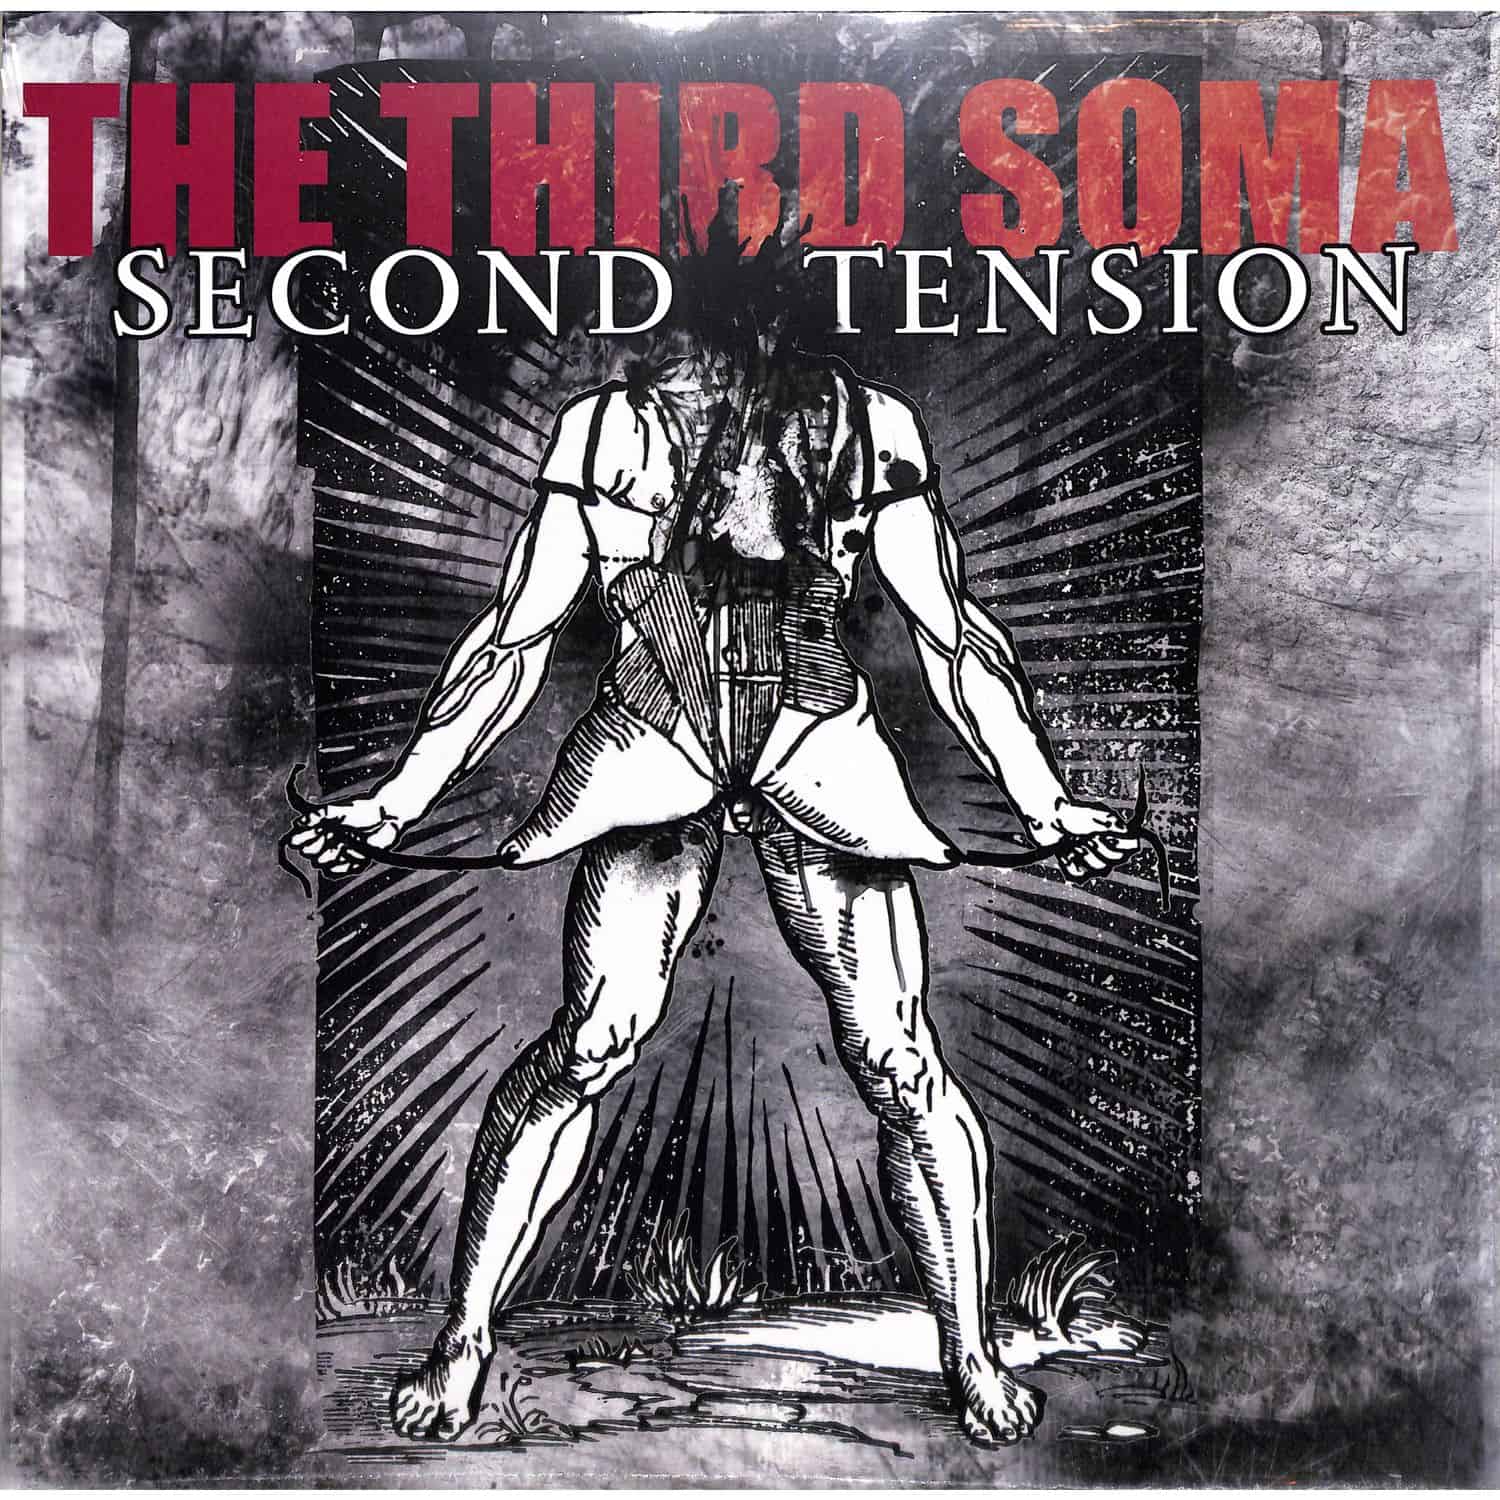 Second Tension - THE THIRD SOMA